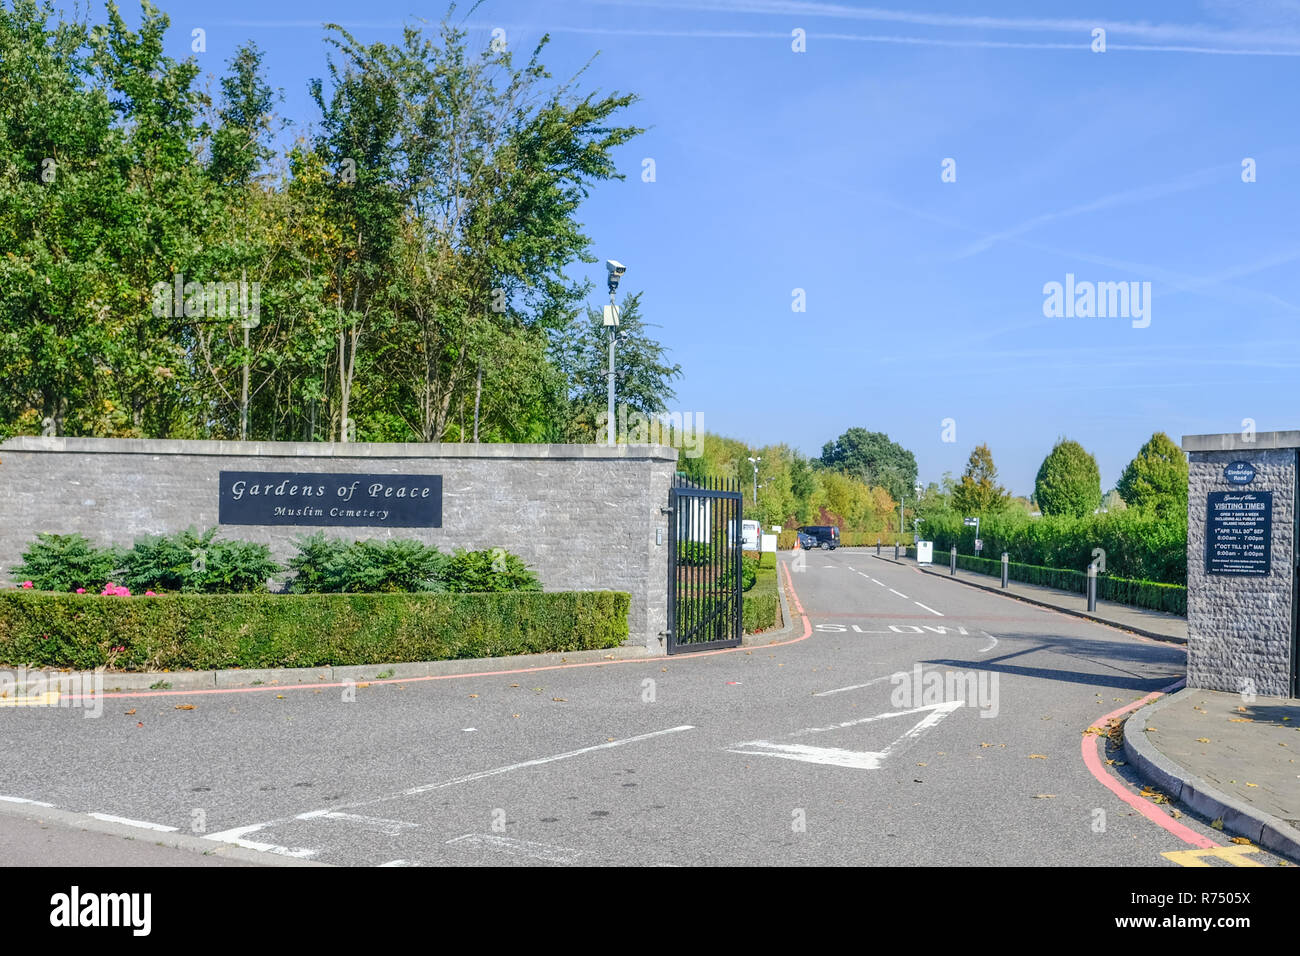 Hainault, Essex, UK - October 5, 2018: View of the entrance to the Gardens of Peace Muslim cemetery in Forest Road, Hainault, Essex. Stock Photo